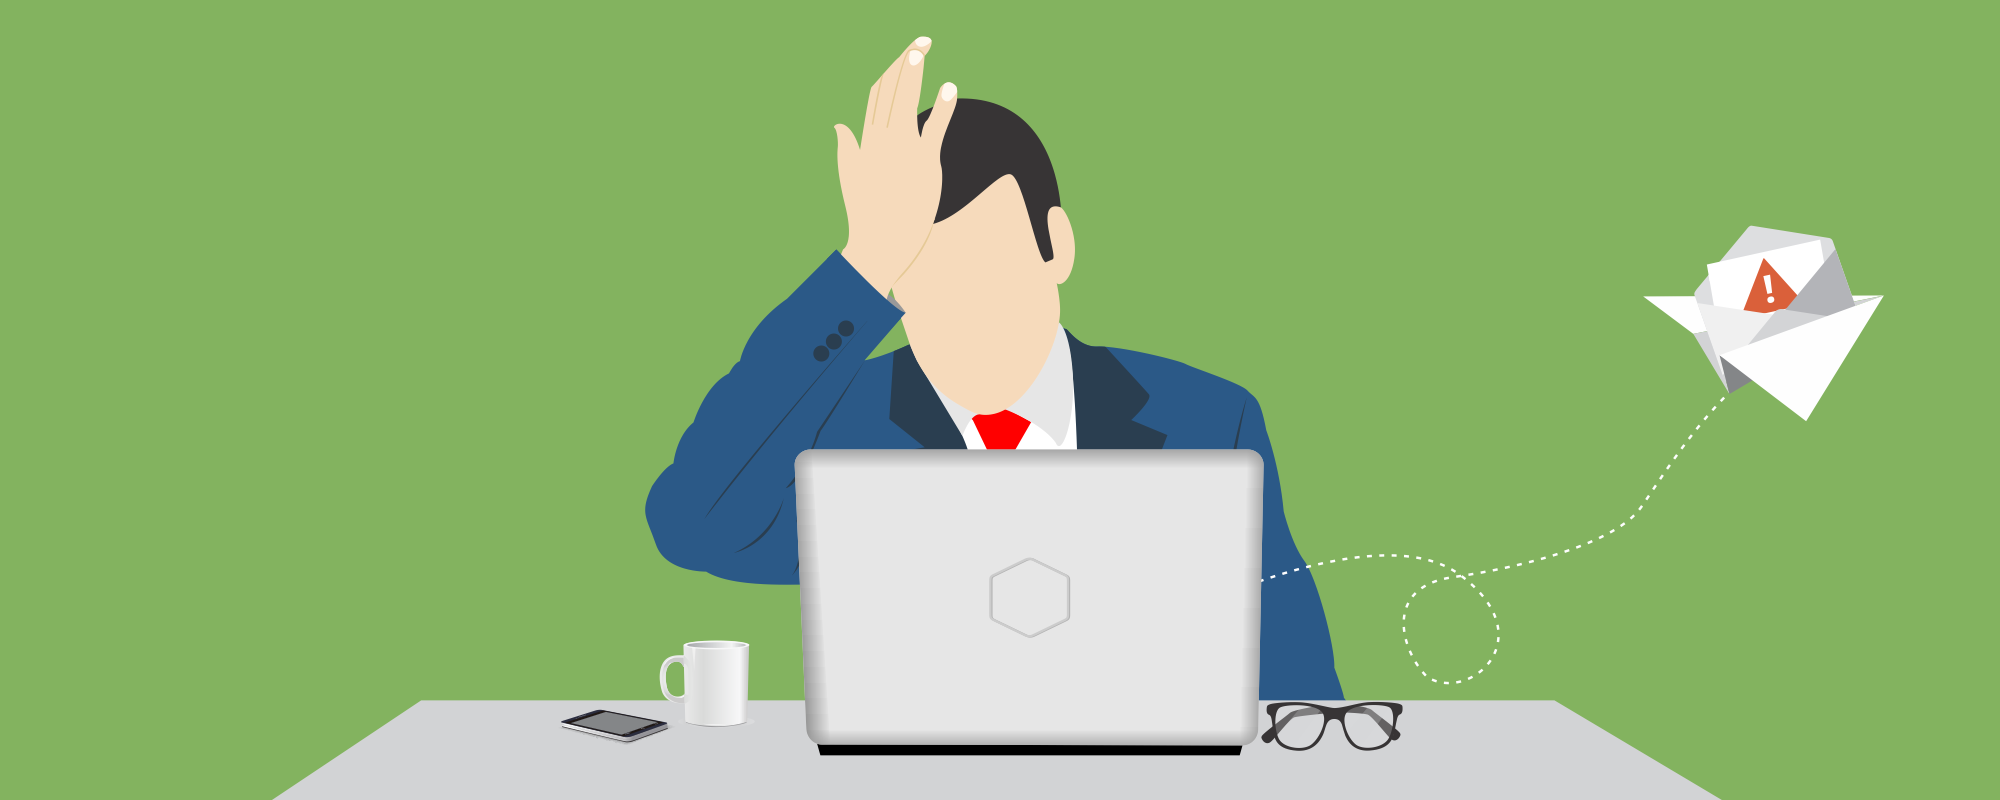 5 Email Marketing Mistakes